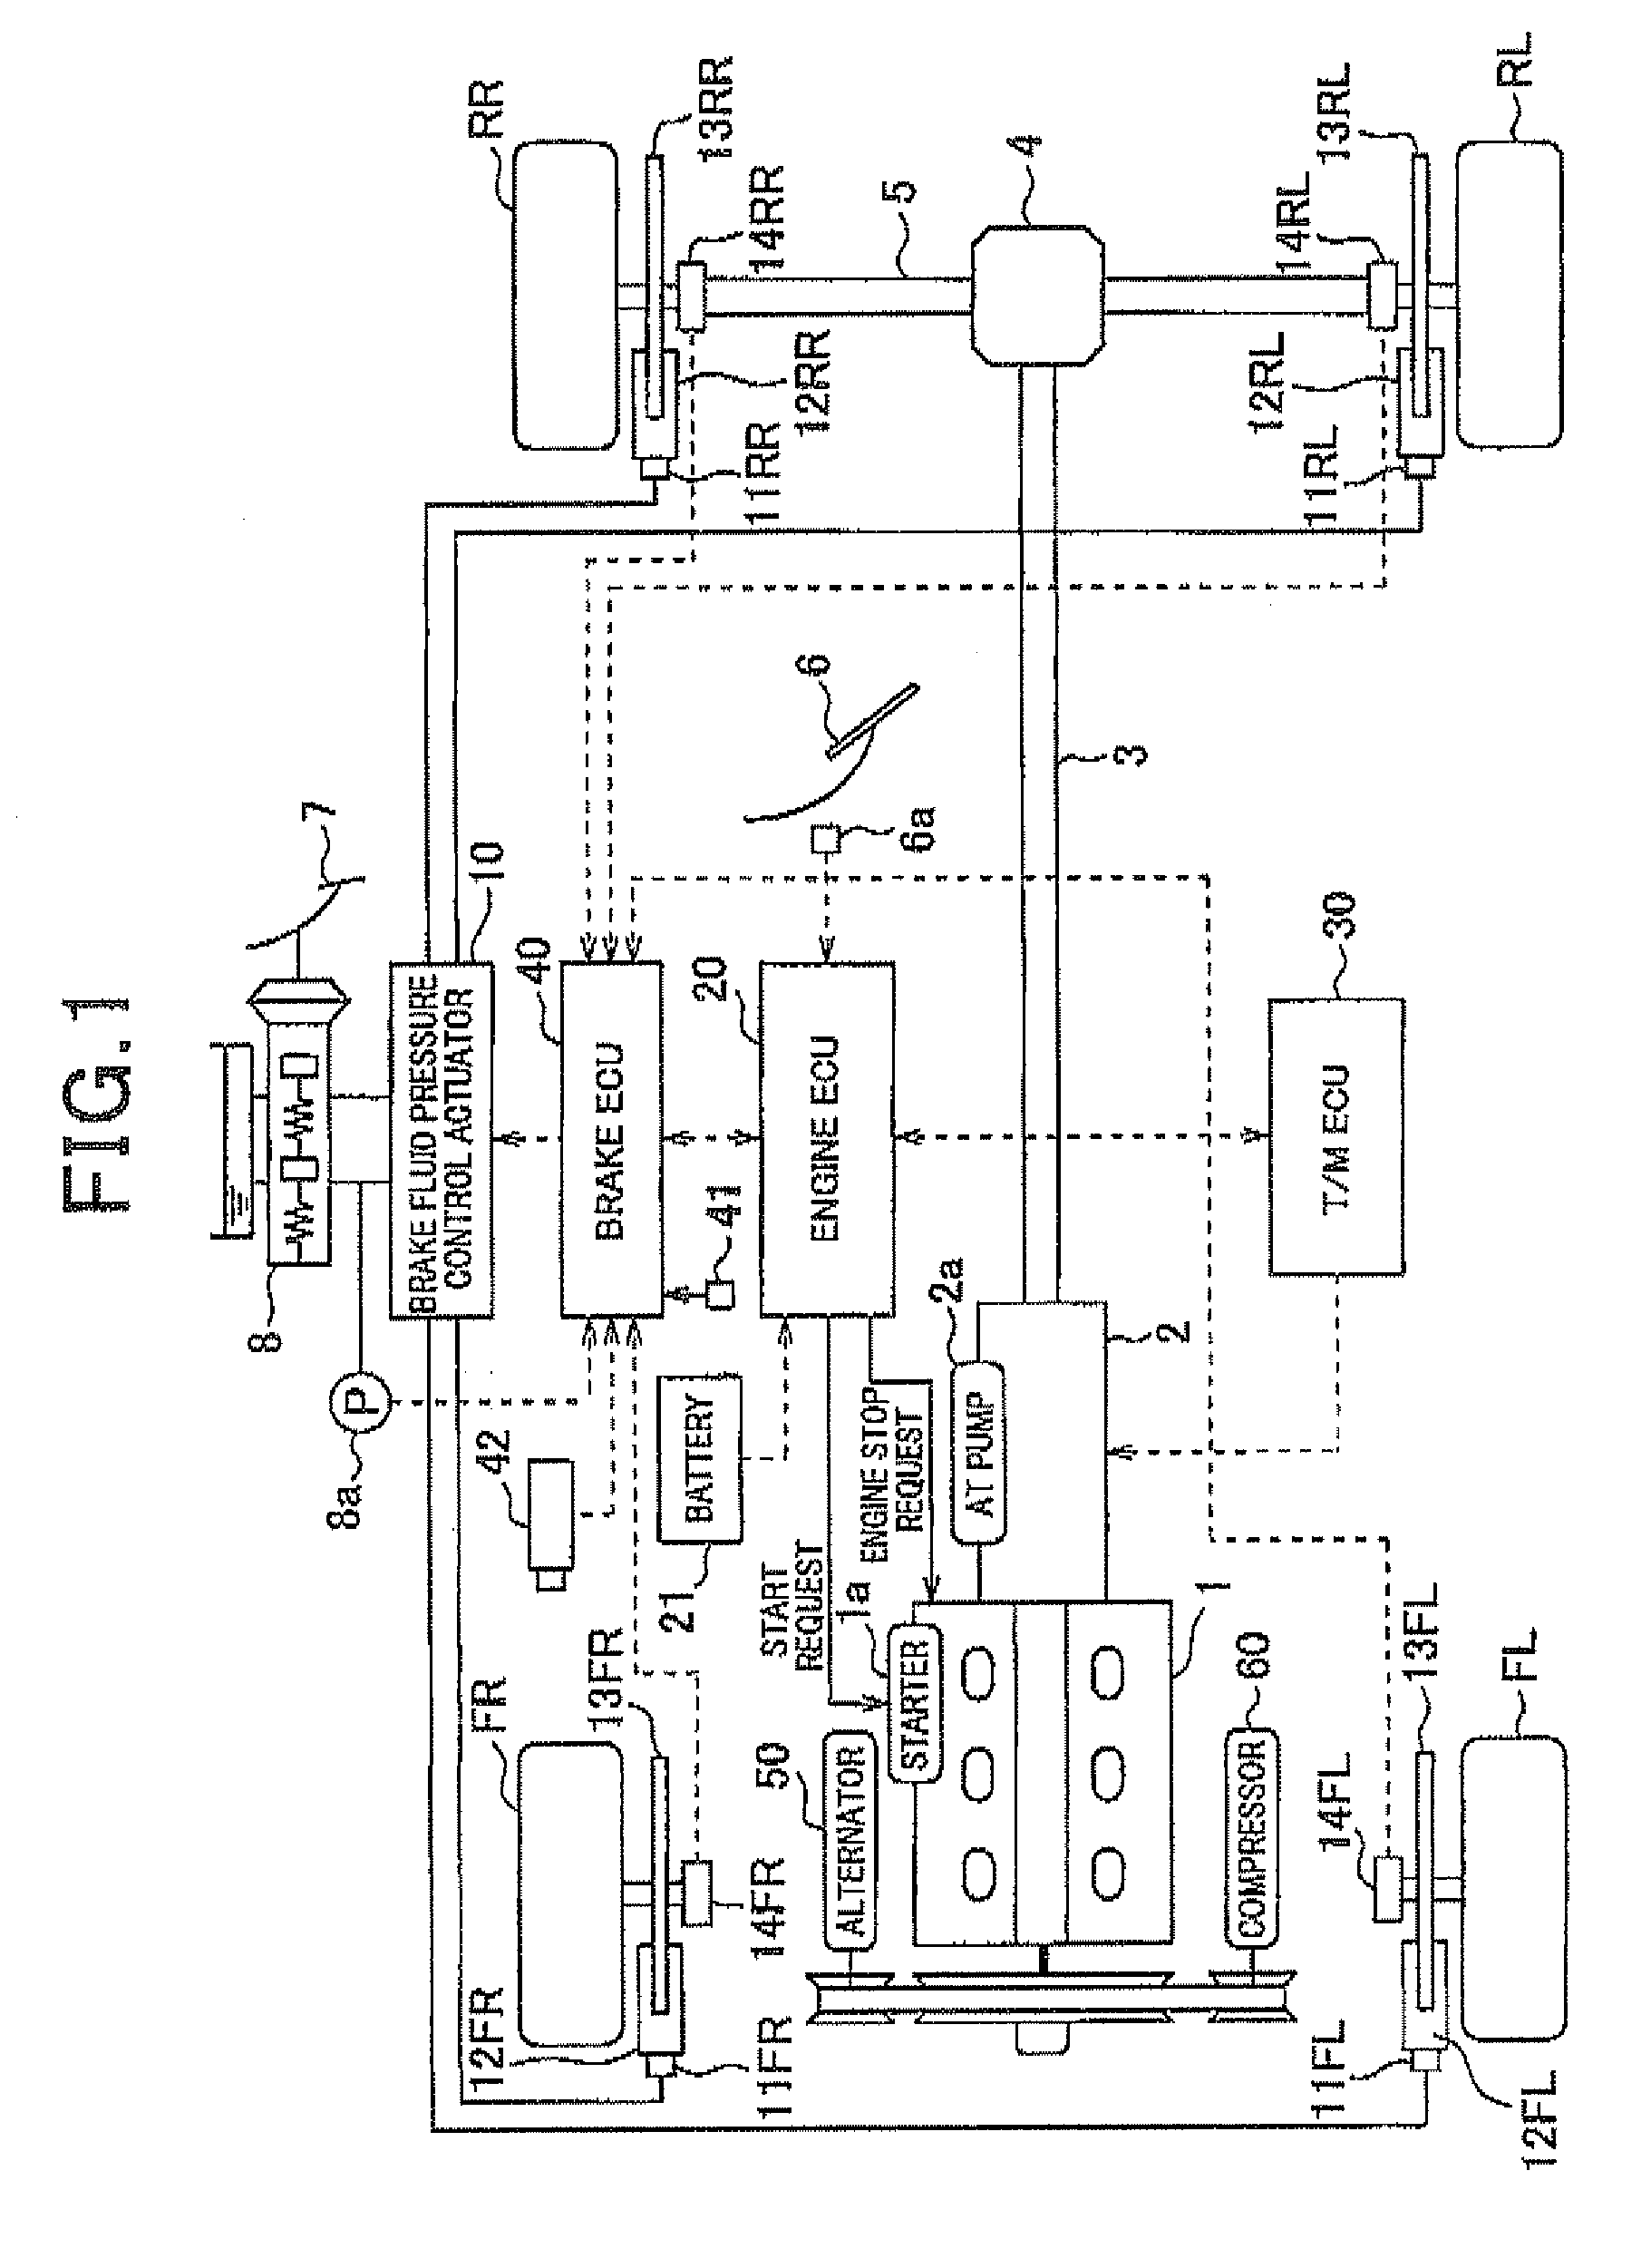 Apparatus for controlling automatic stop and restart of engine